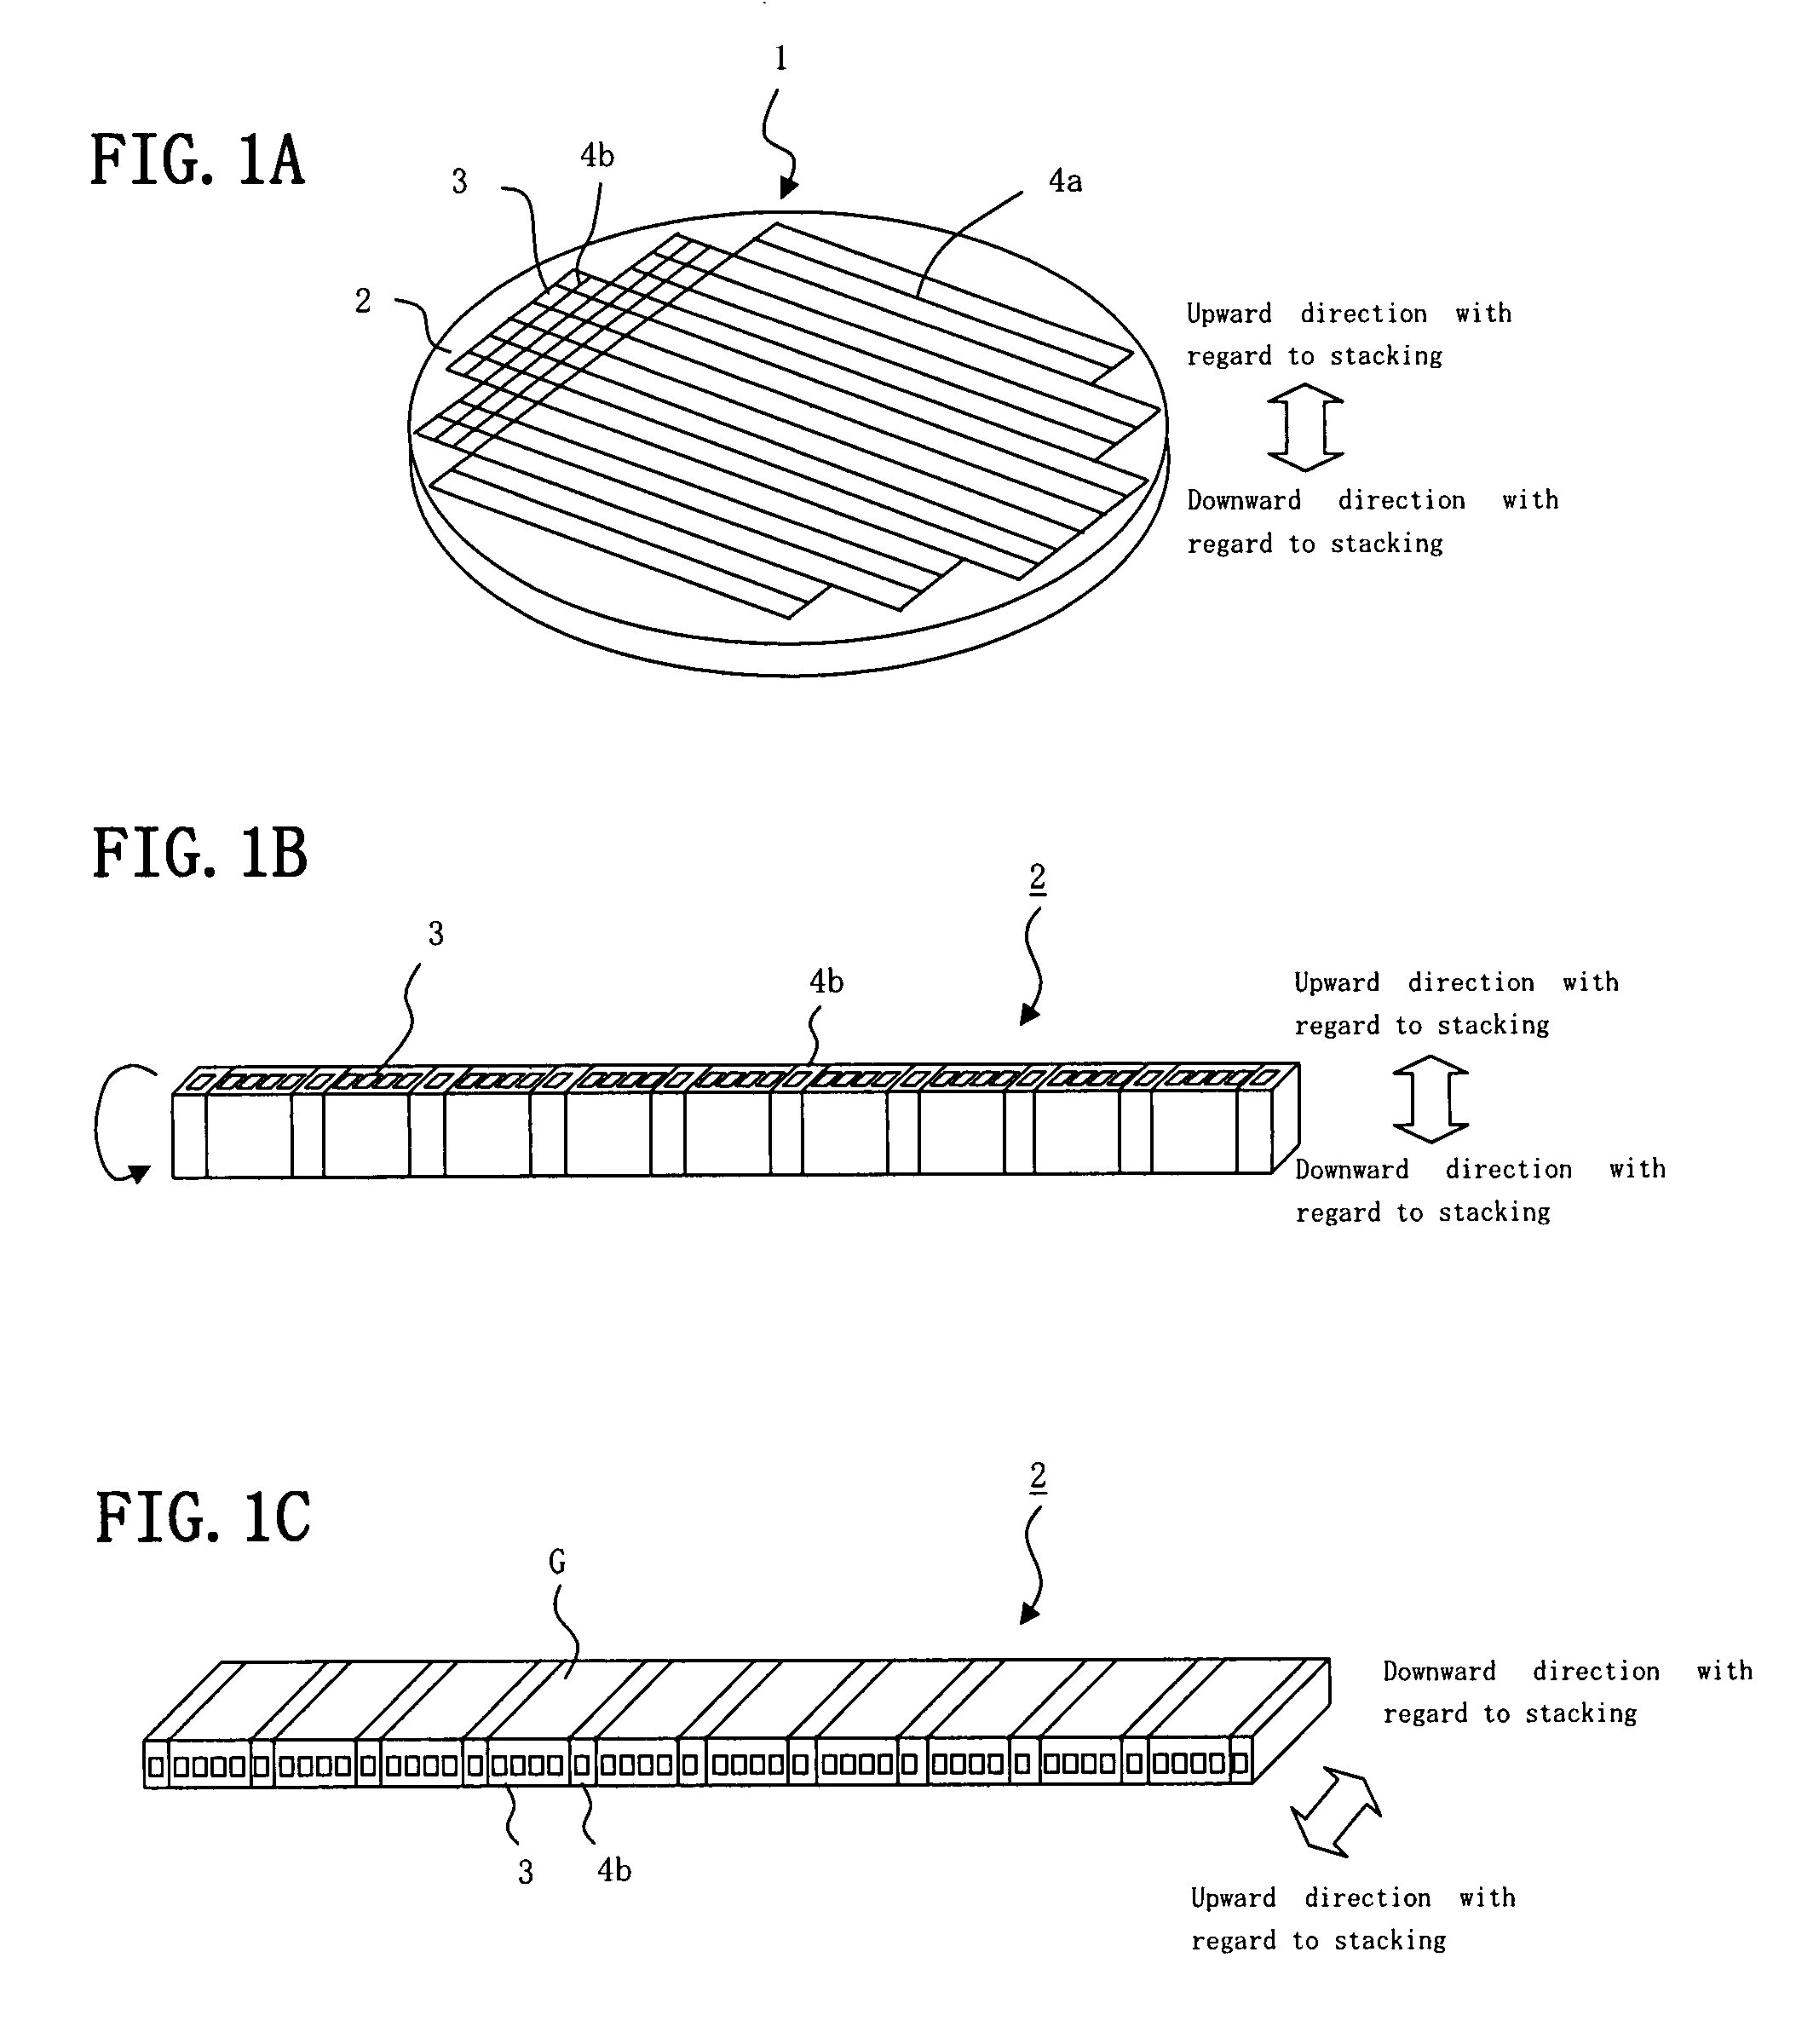 Element for detecting the amount of lapping having a resistive film electrically connected to the substrate